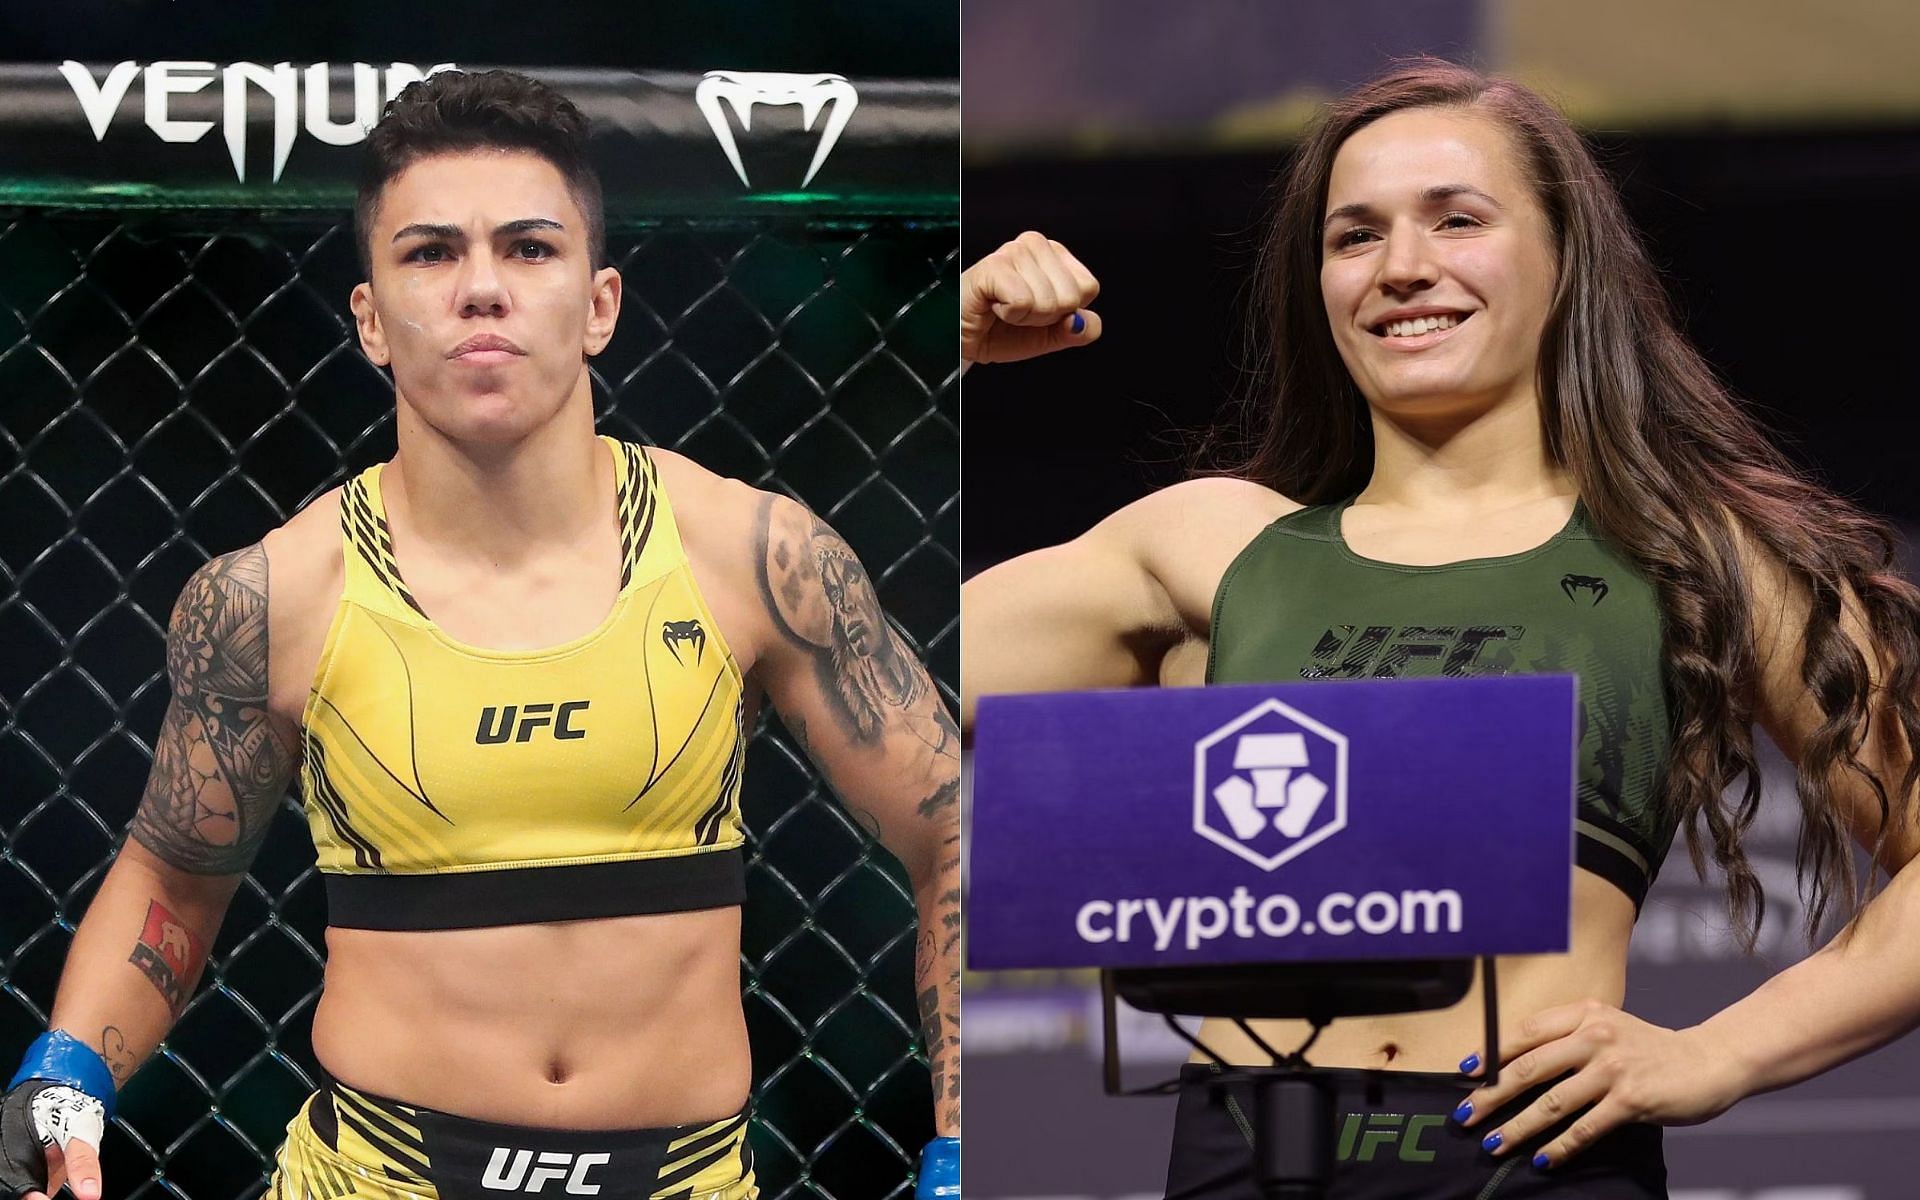 UFC Vegas 69: Jessica Andrade vs Erin Blanchfield: Preview, Prediction and Odds for UFC Fight Night 219, CHECK DETAILS on Andrade vs Blanchfield